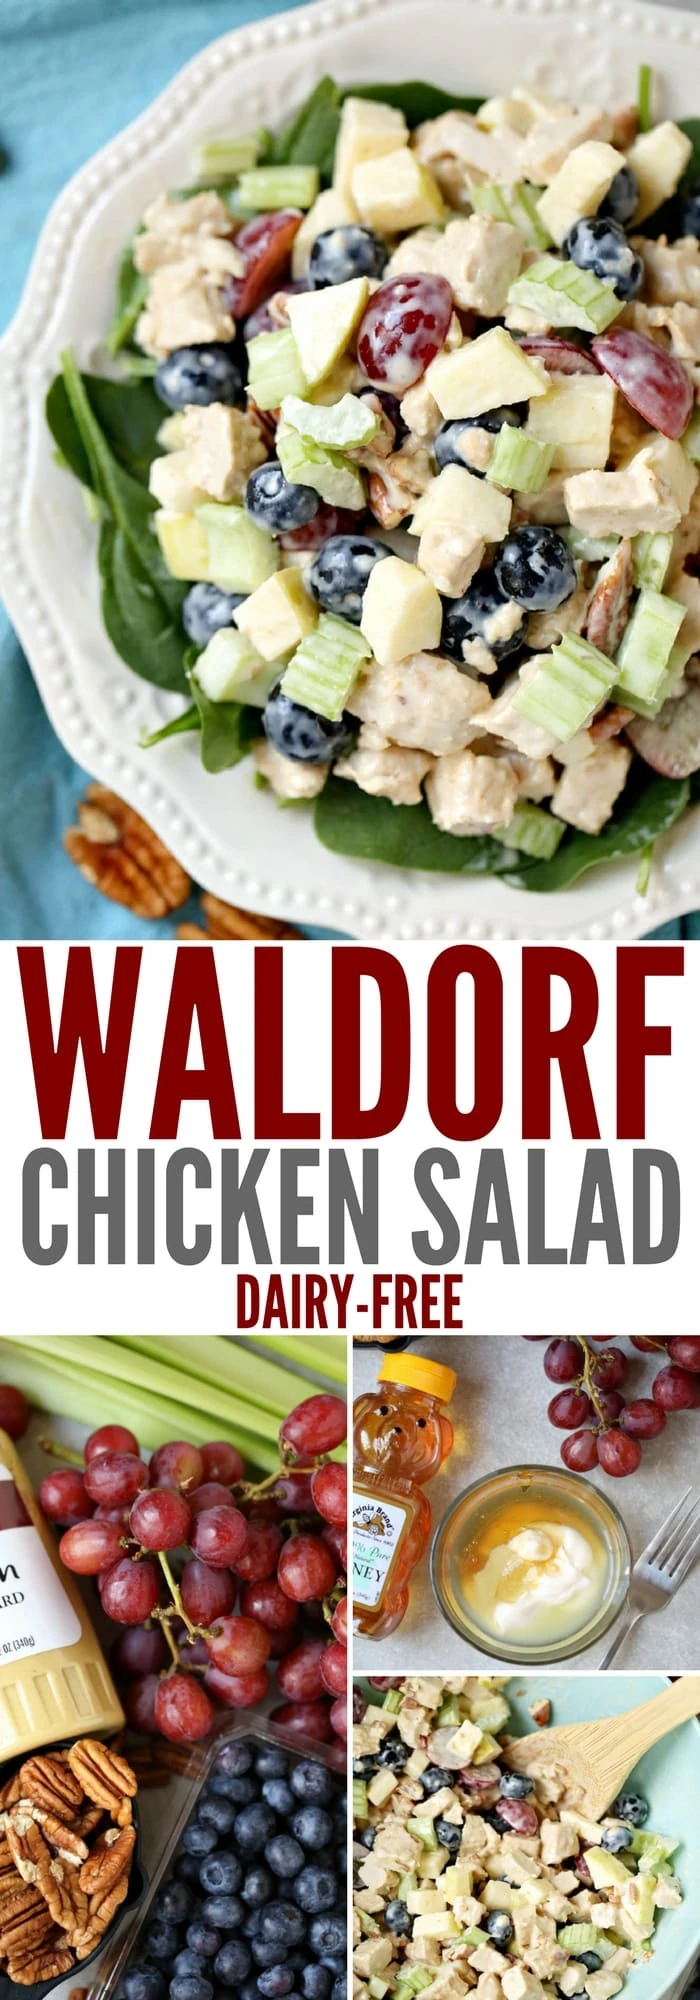 A tasty twist on regular chicken salad, this Waldorf Chicken Salad recipe is loaded with delicious fruit - apples, blueberries, grapes. The mayo, lemon juice, and honey dressing is light and dairy-free too!